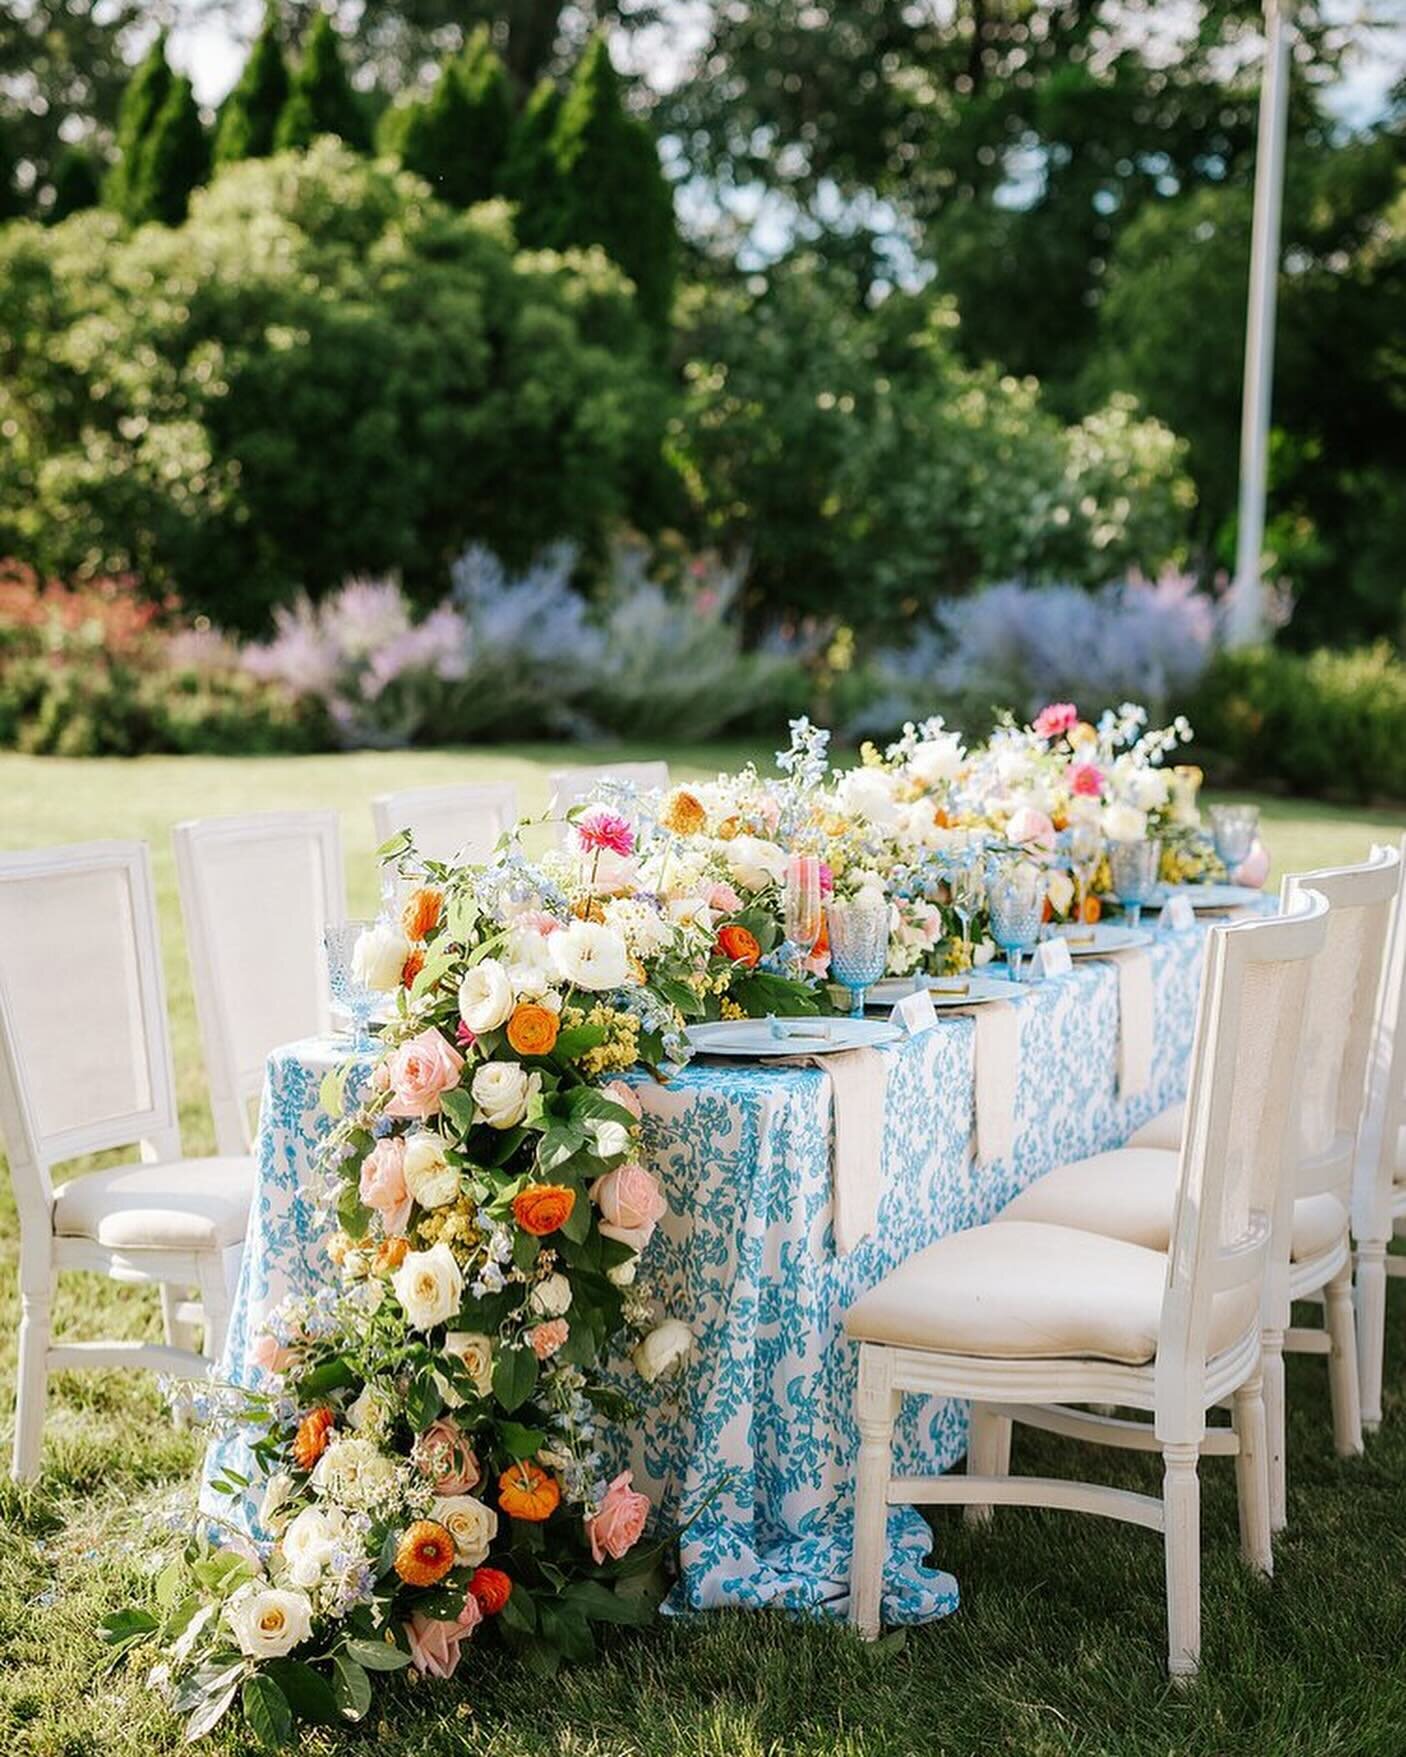 This team created an anniversary styled shoot for a couple on their one year anniversary. It is a Cape Cod inspired tablescape showing off what florals and a unique tablecloth can do for a table!!
Planning + Design: @northwestweddings 
Photography: @